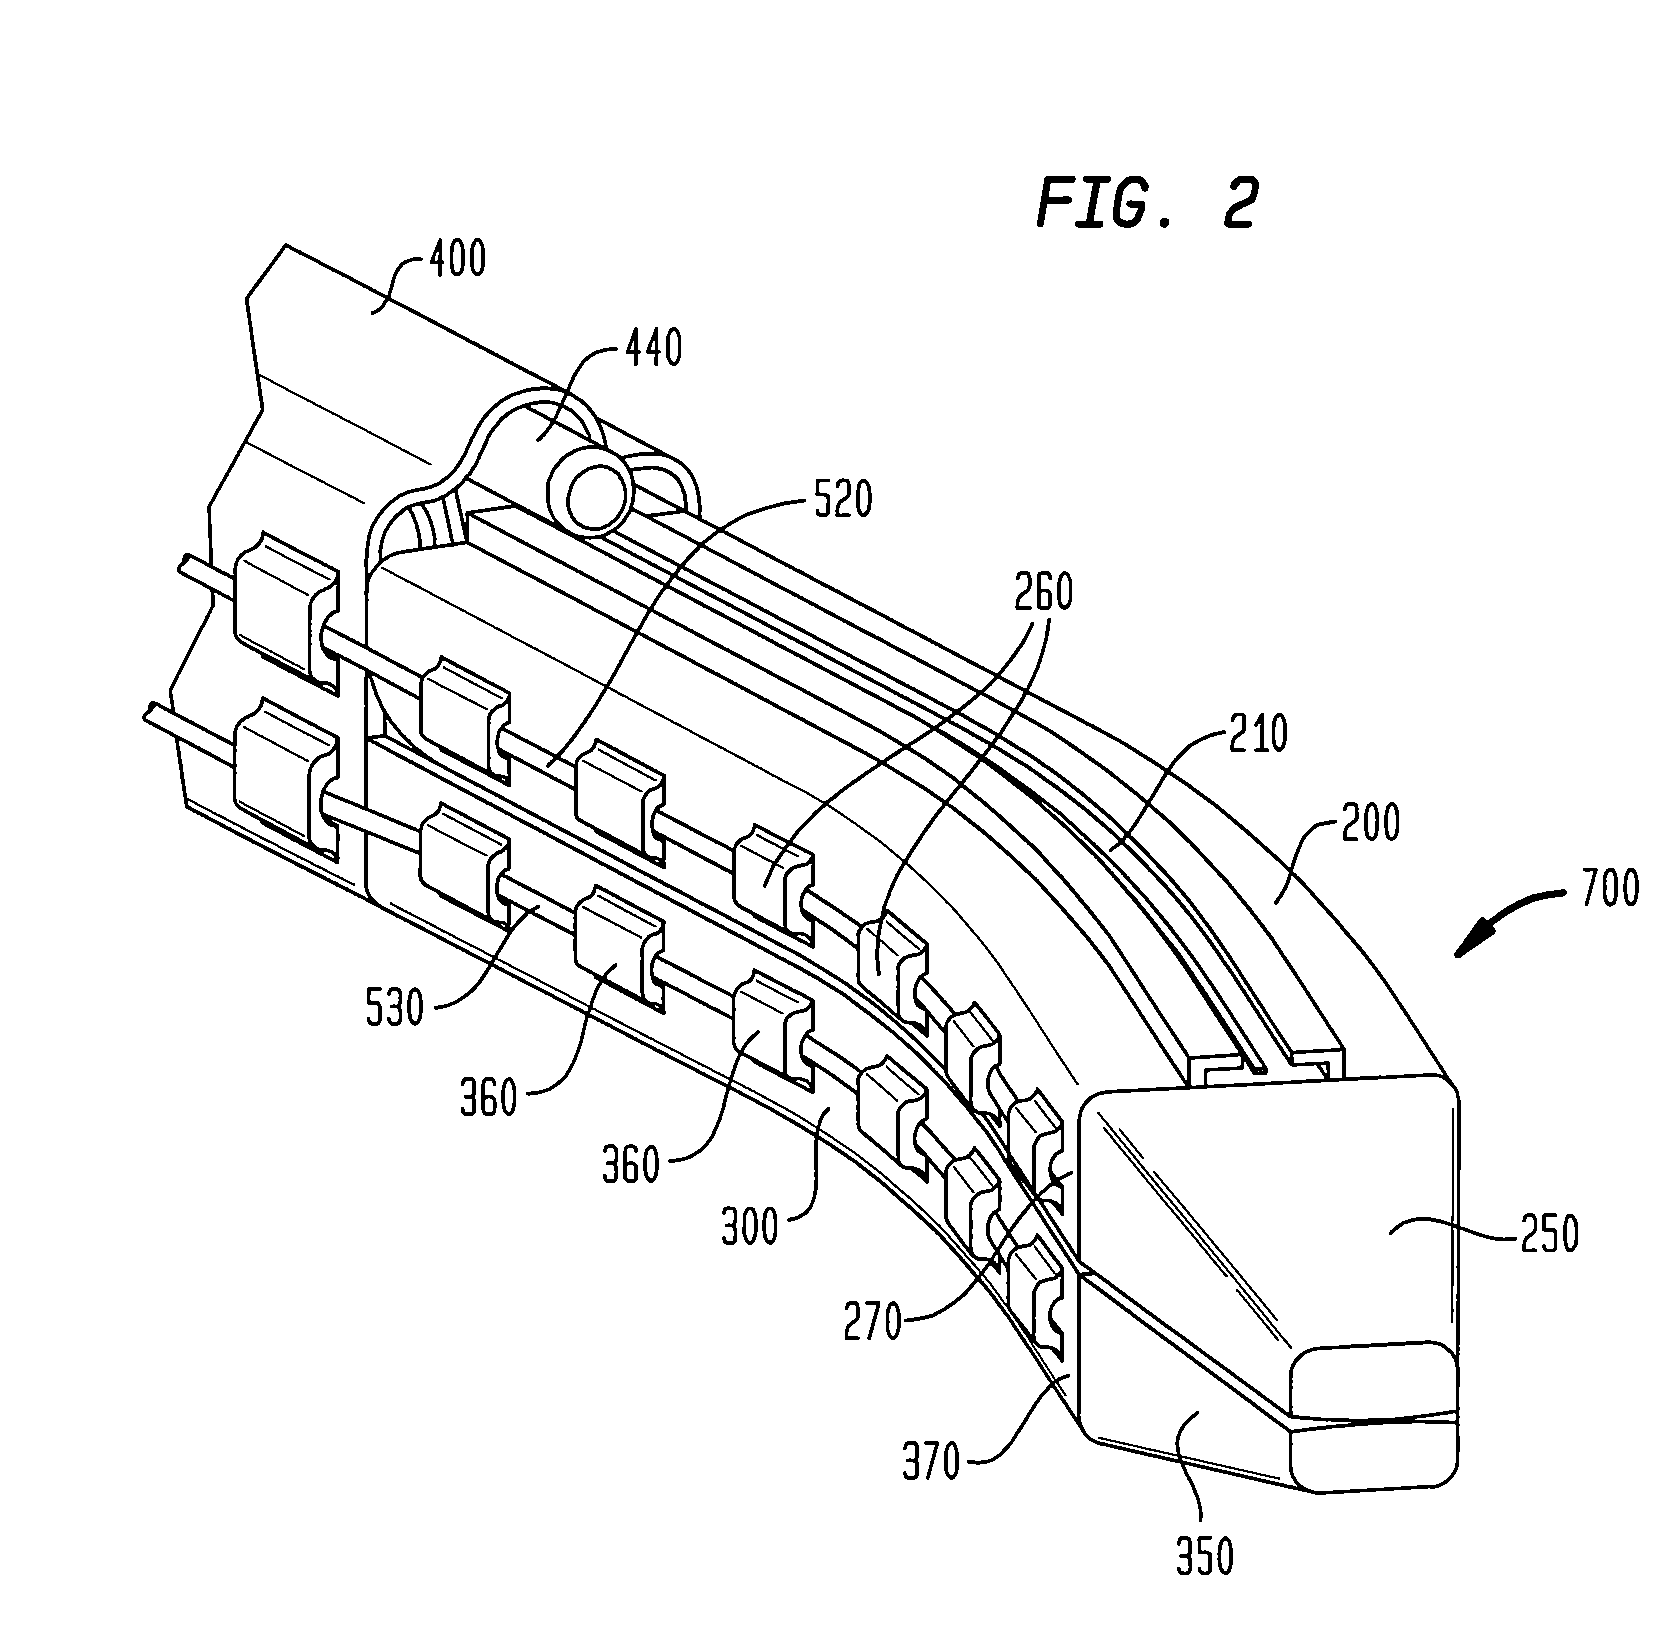 Surgical stapler with a bendable end effector